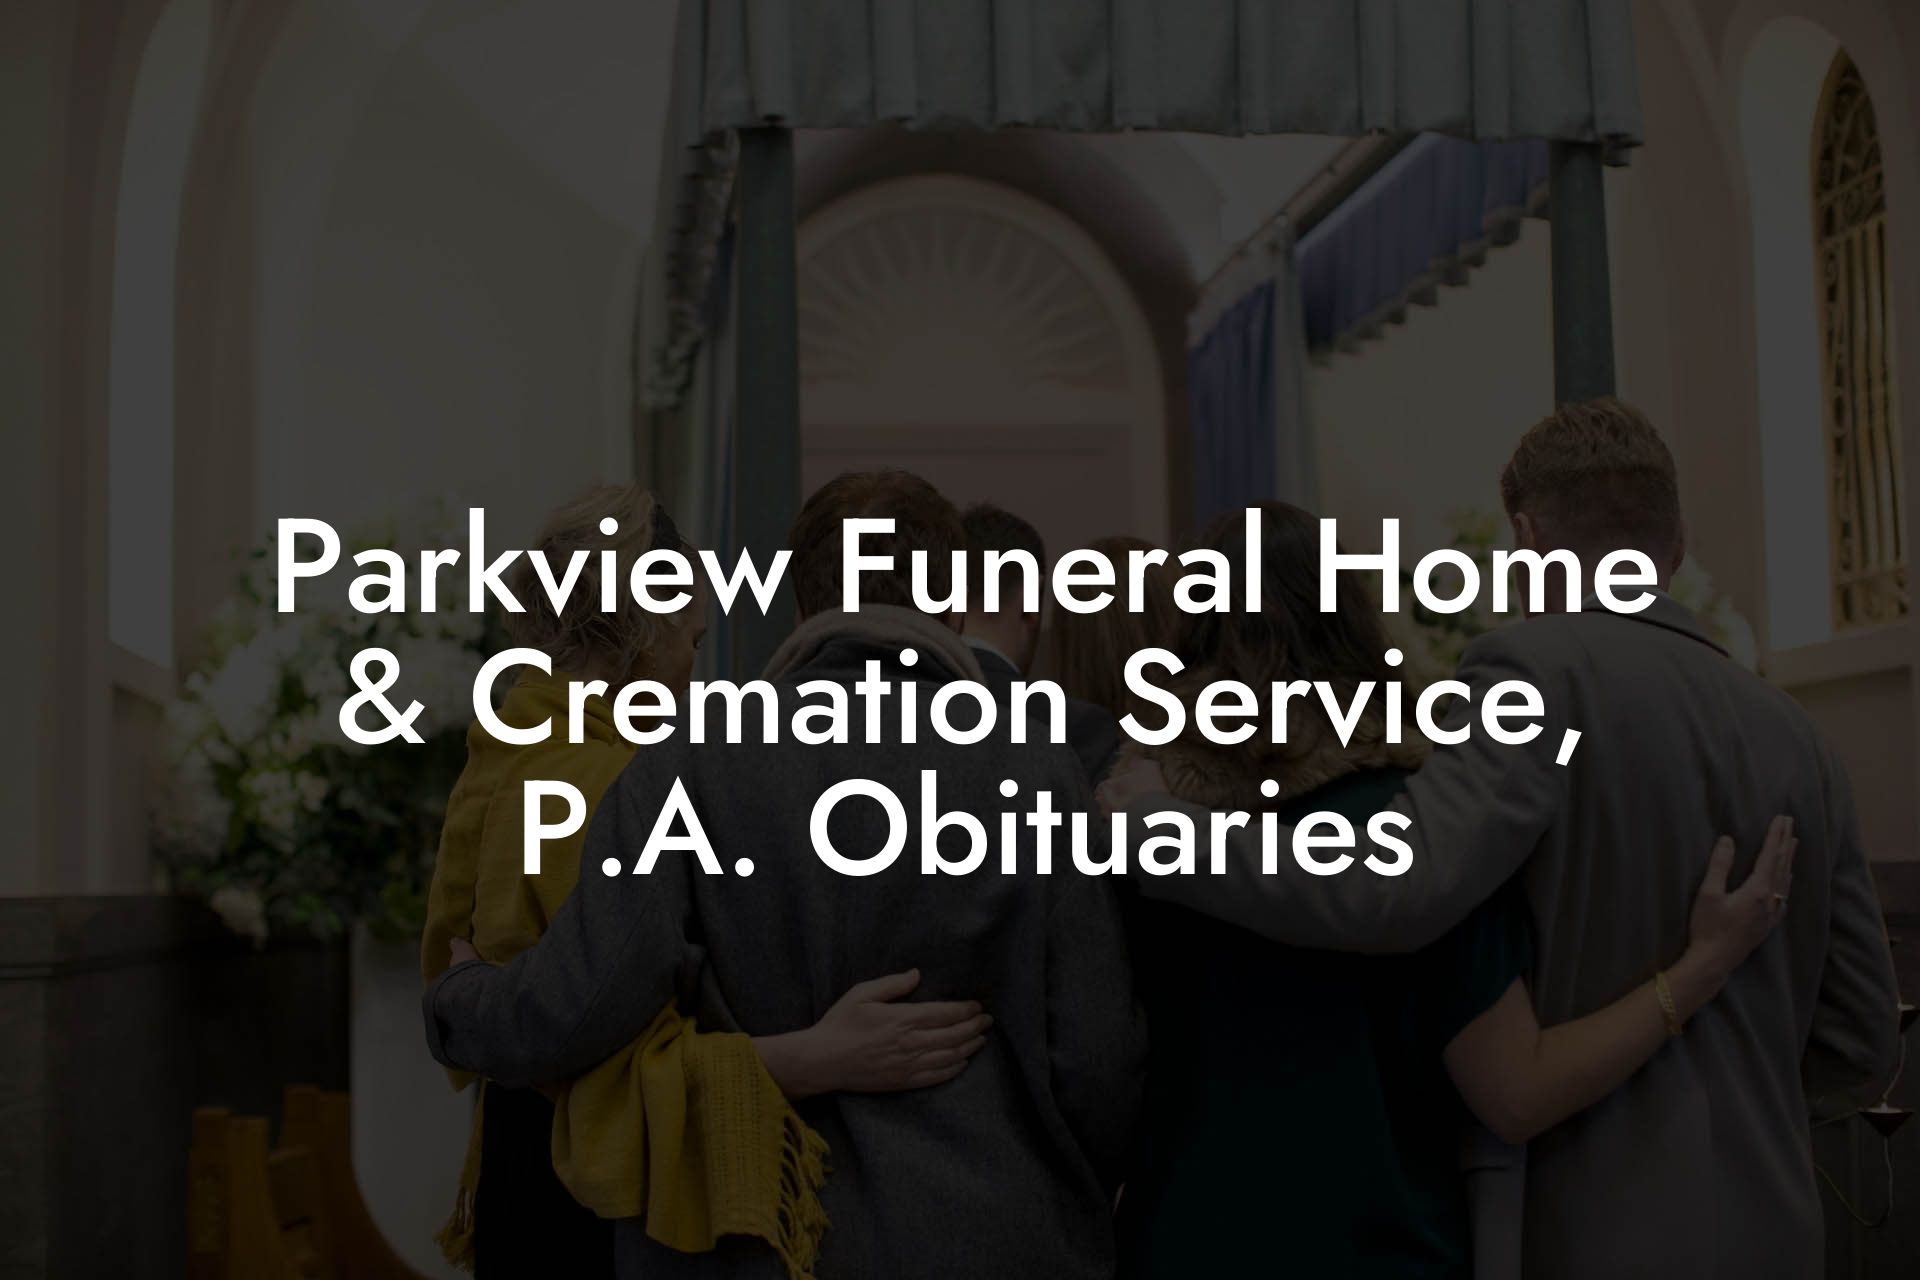 Parkview Funeral Home & Cremation Service, P.A. Obituaries